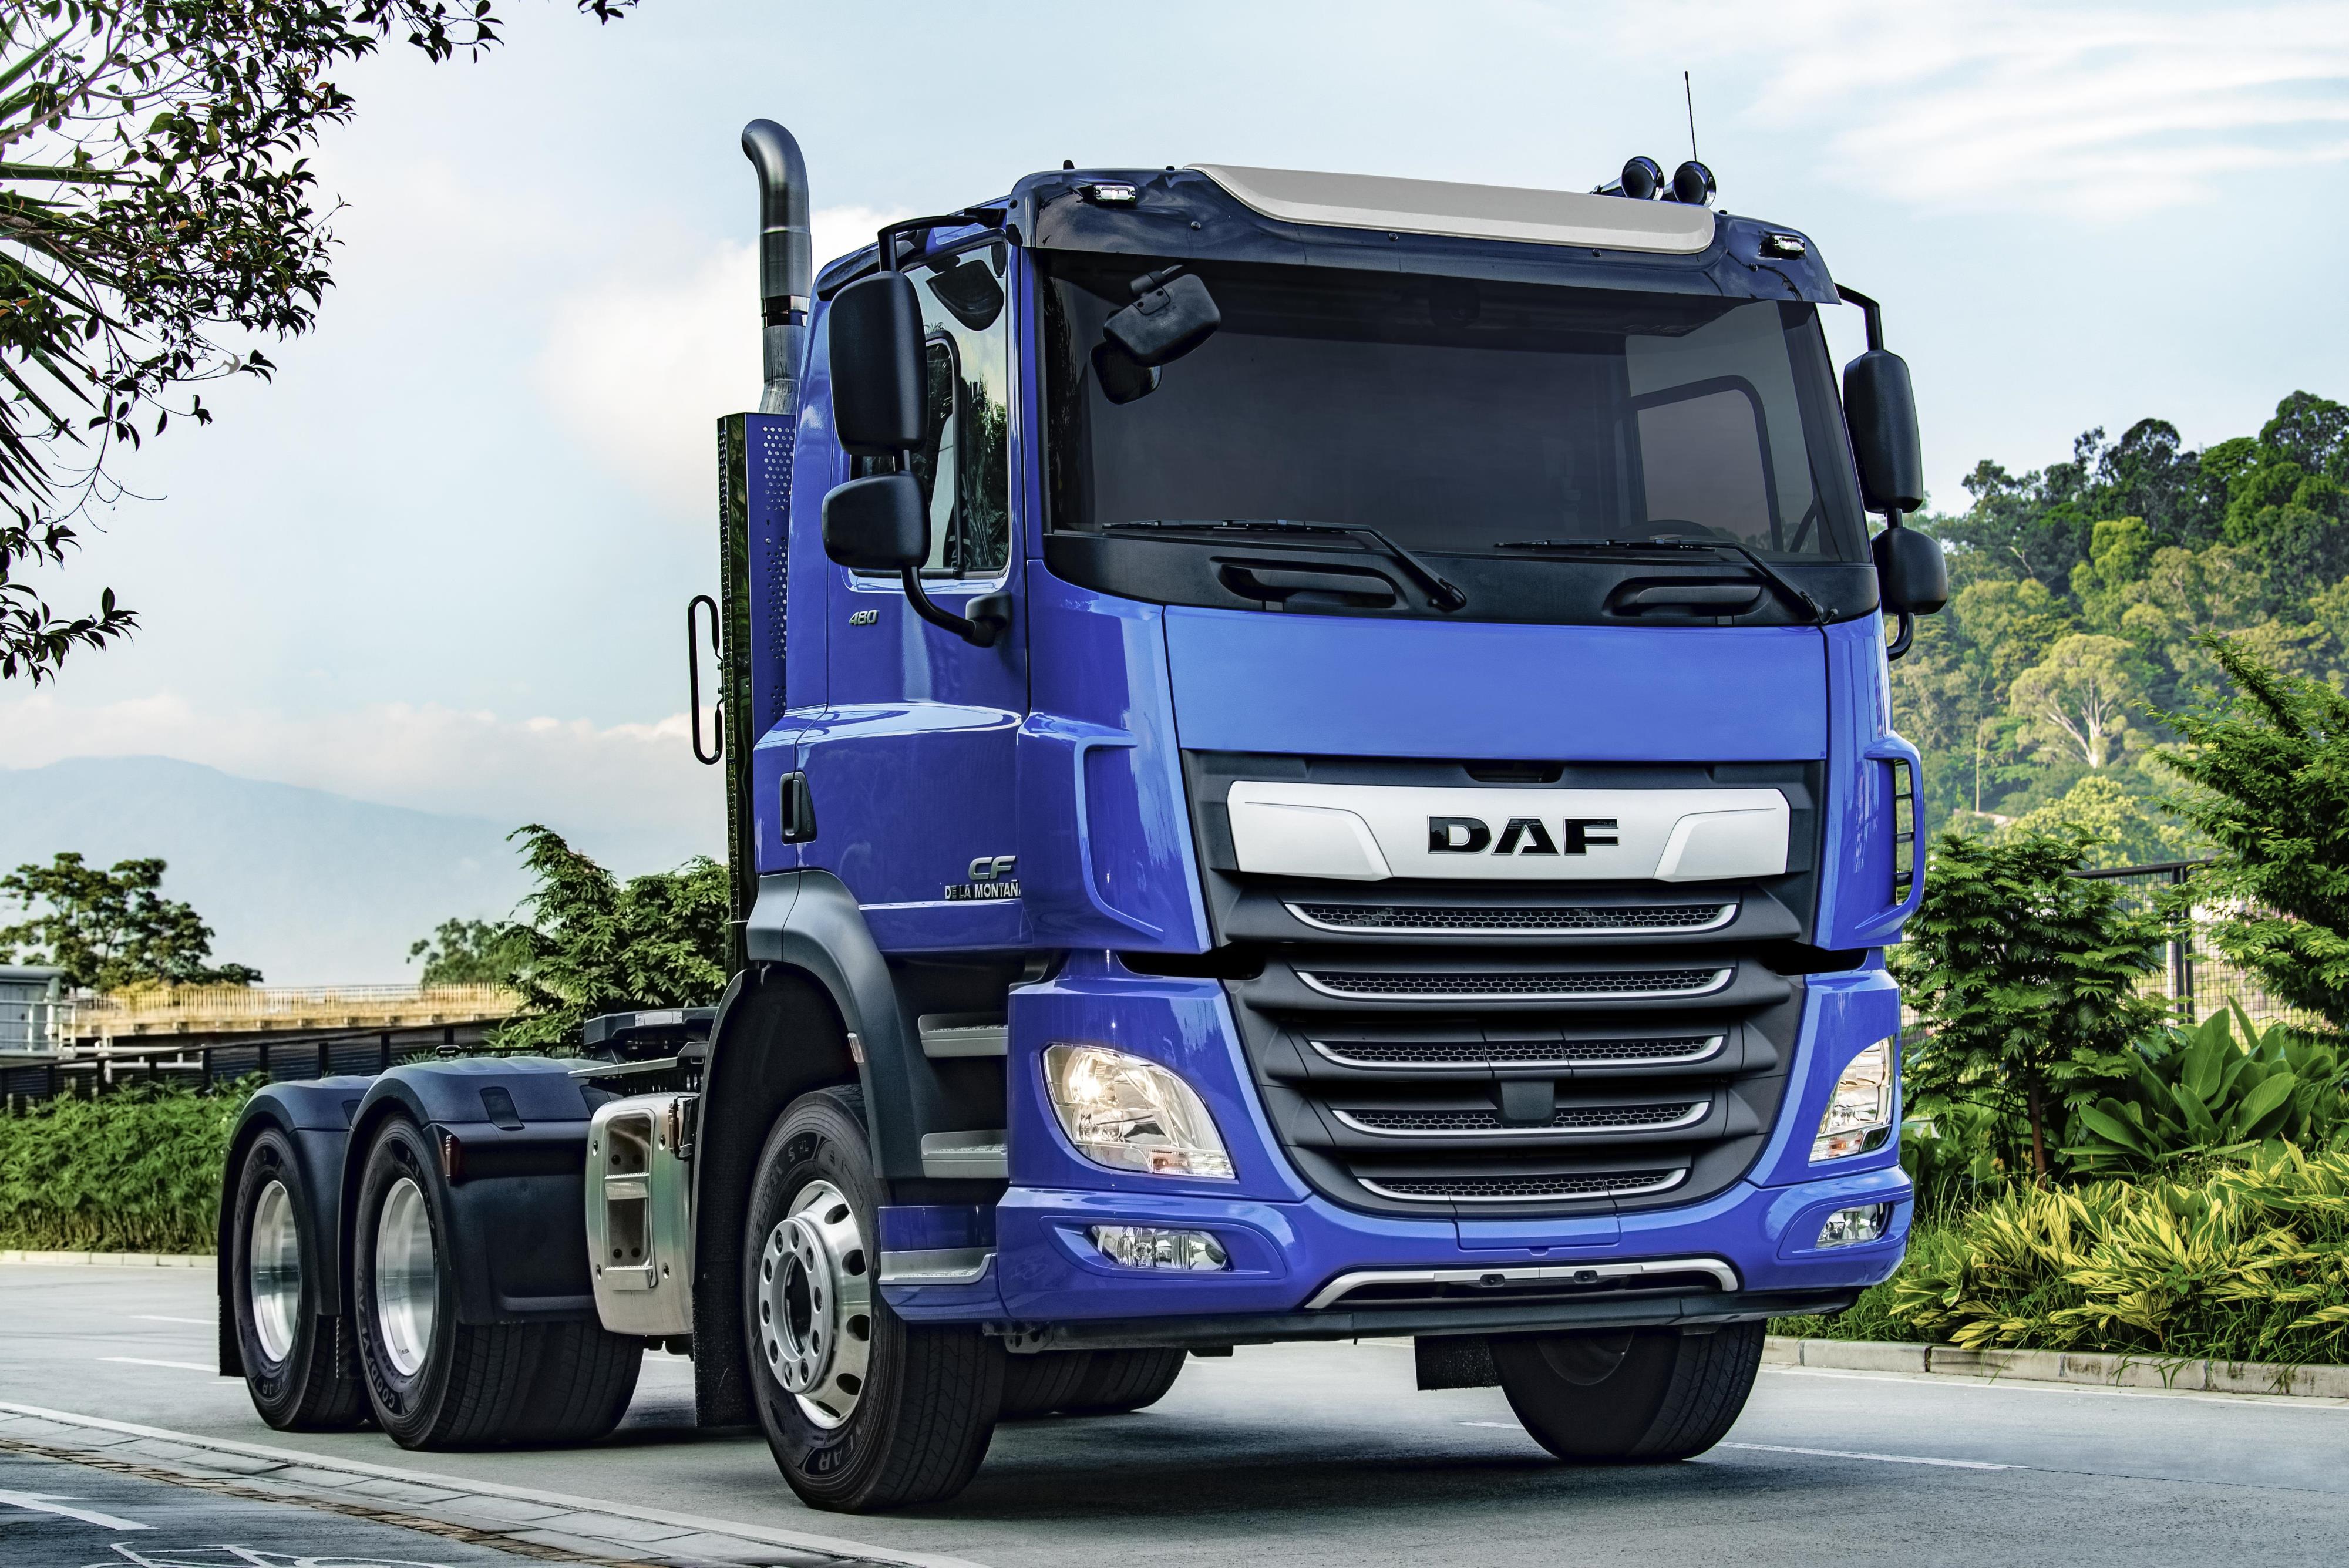 suspensie leef ermee evenwicht DAF to ship 200 heavy-duty trucks to Colombia - DAF Countries